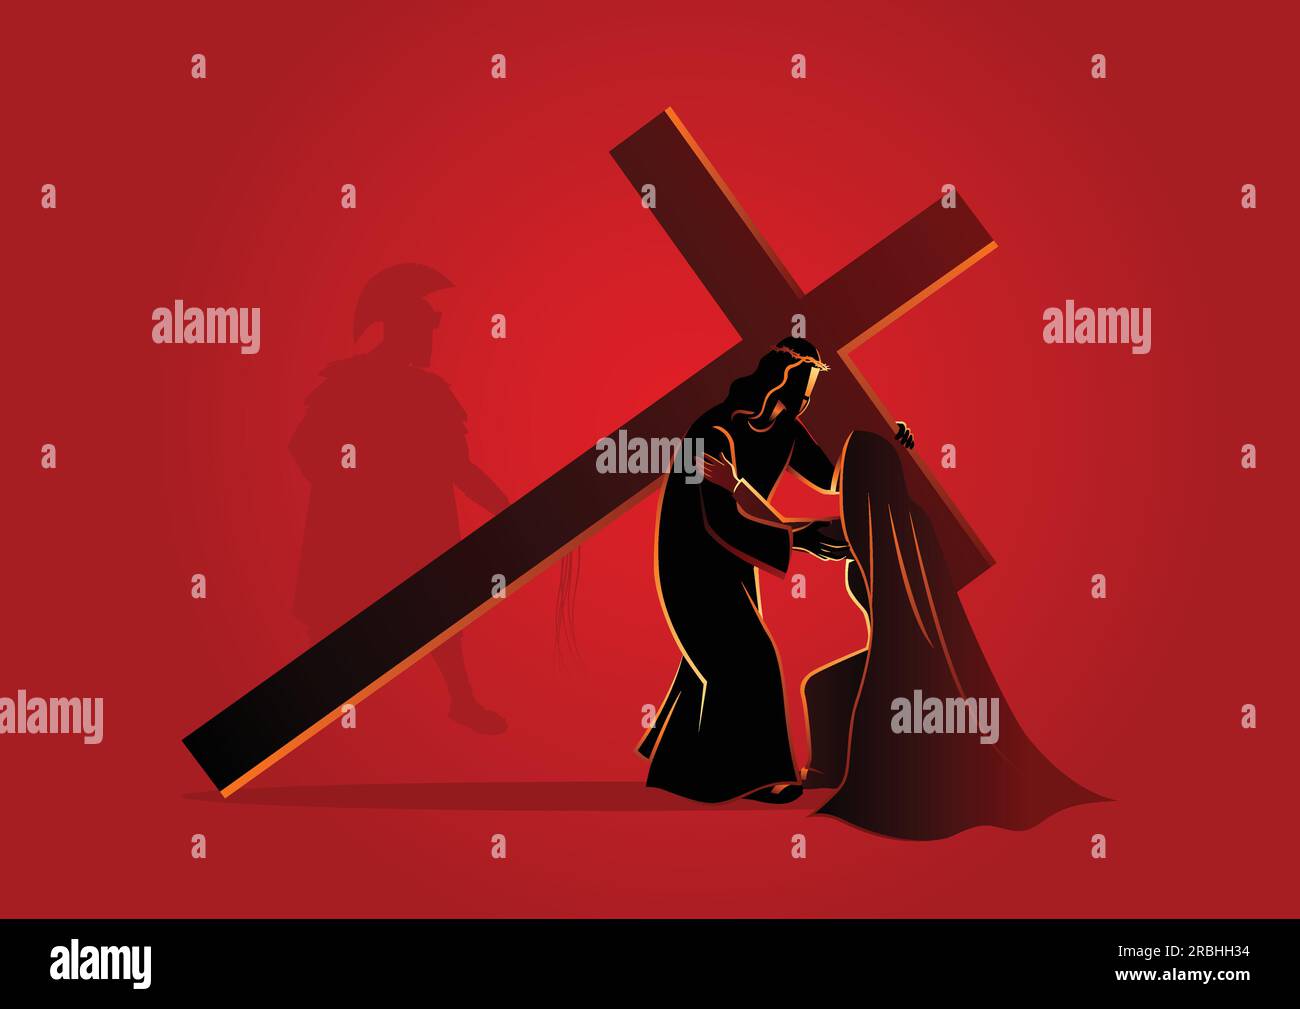 Biblical vector illustration series. Way of the Cross or Stations of the Cross, fourth station, Jesus meets his blessed mother, Mary. Stock Vector